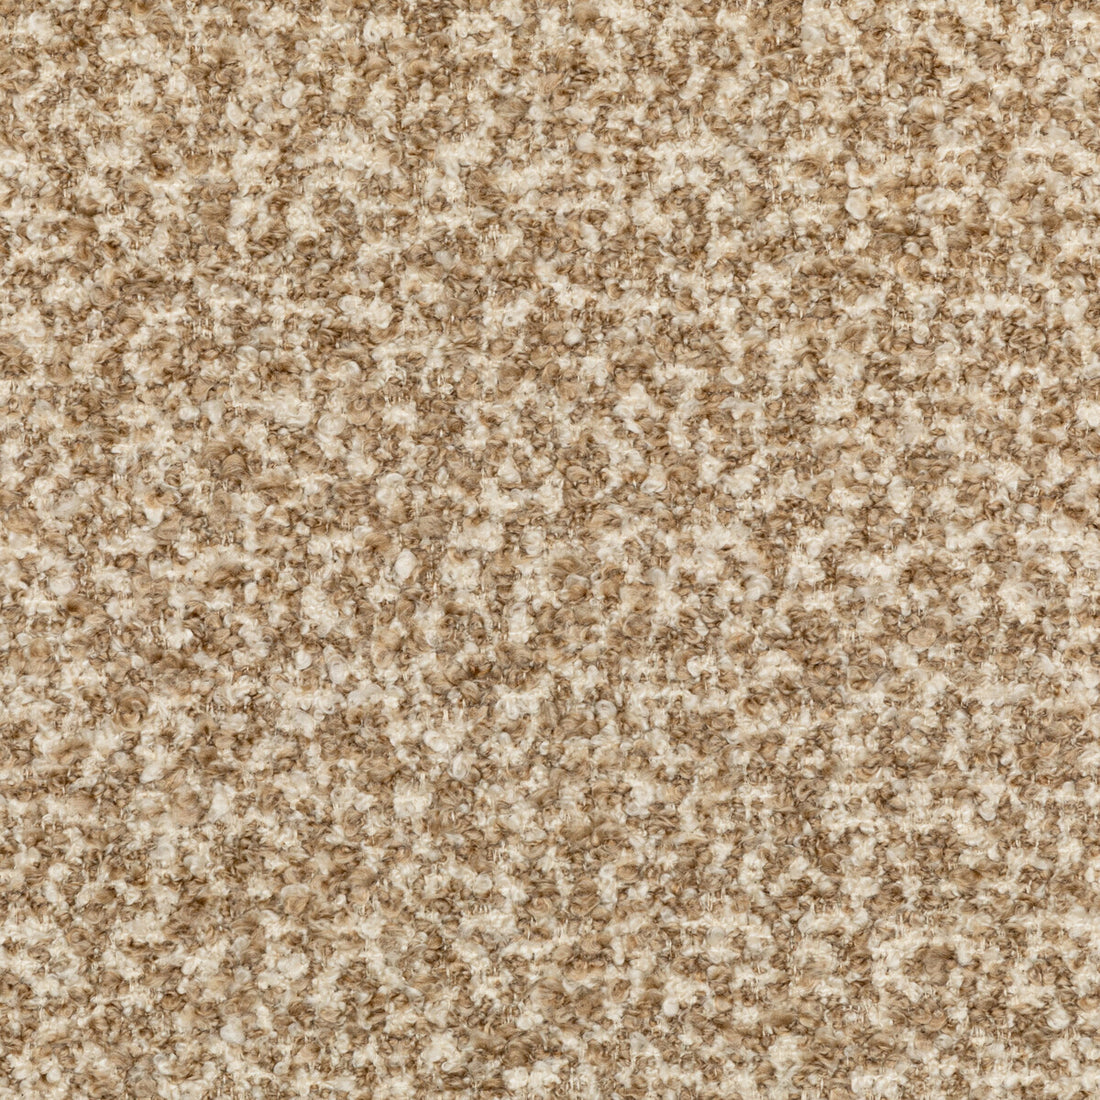 Flying High fabric in camel color - pattern 36105.16.0 - by Kravet Couture in the Luxury Textures II collection